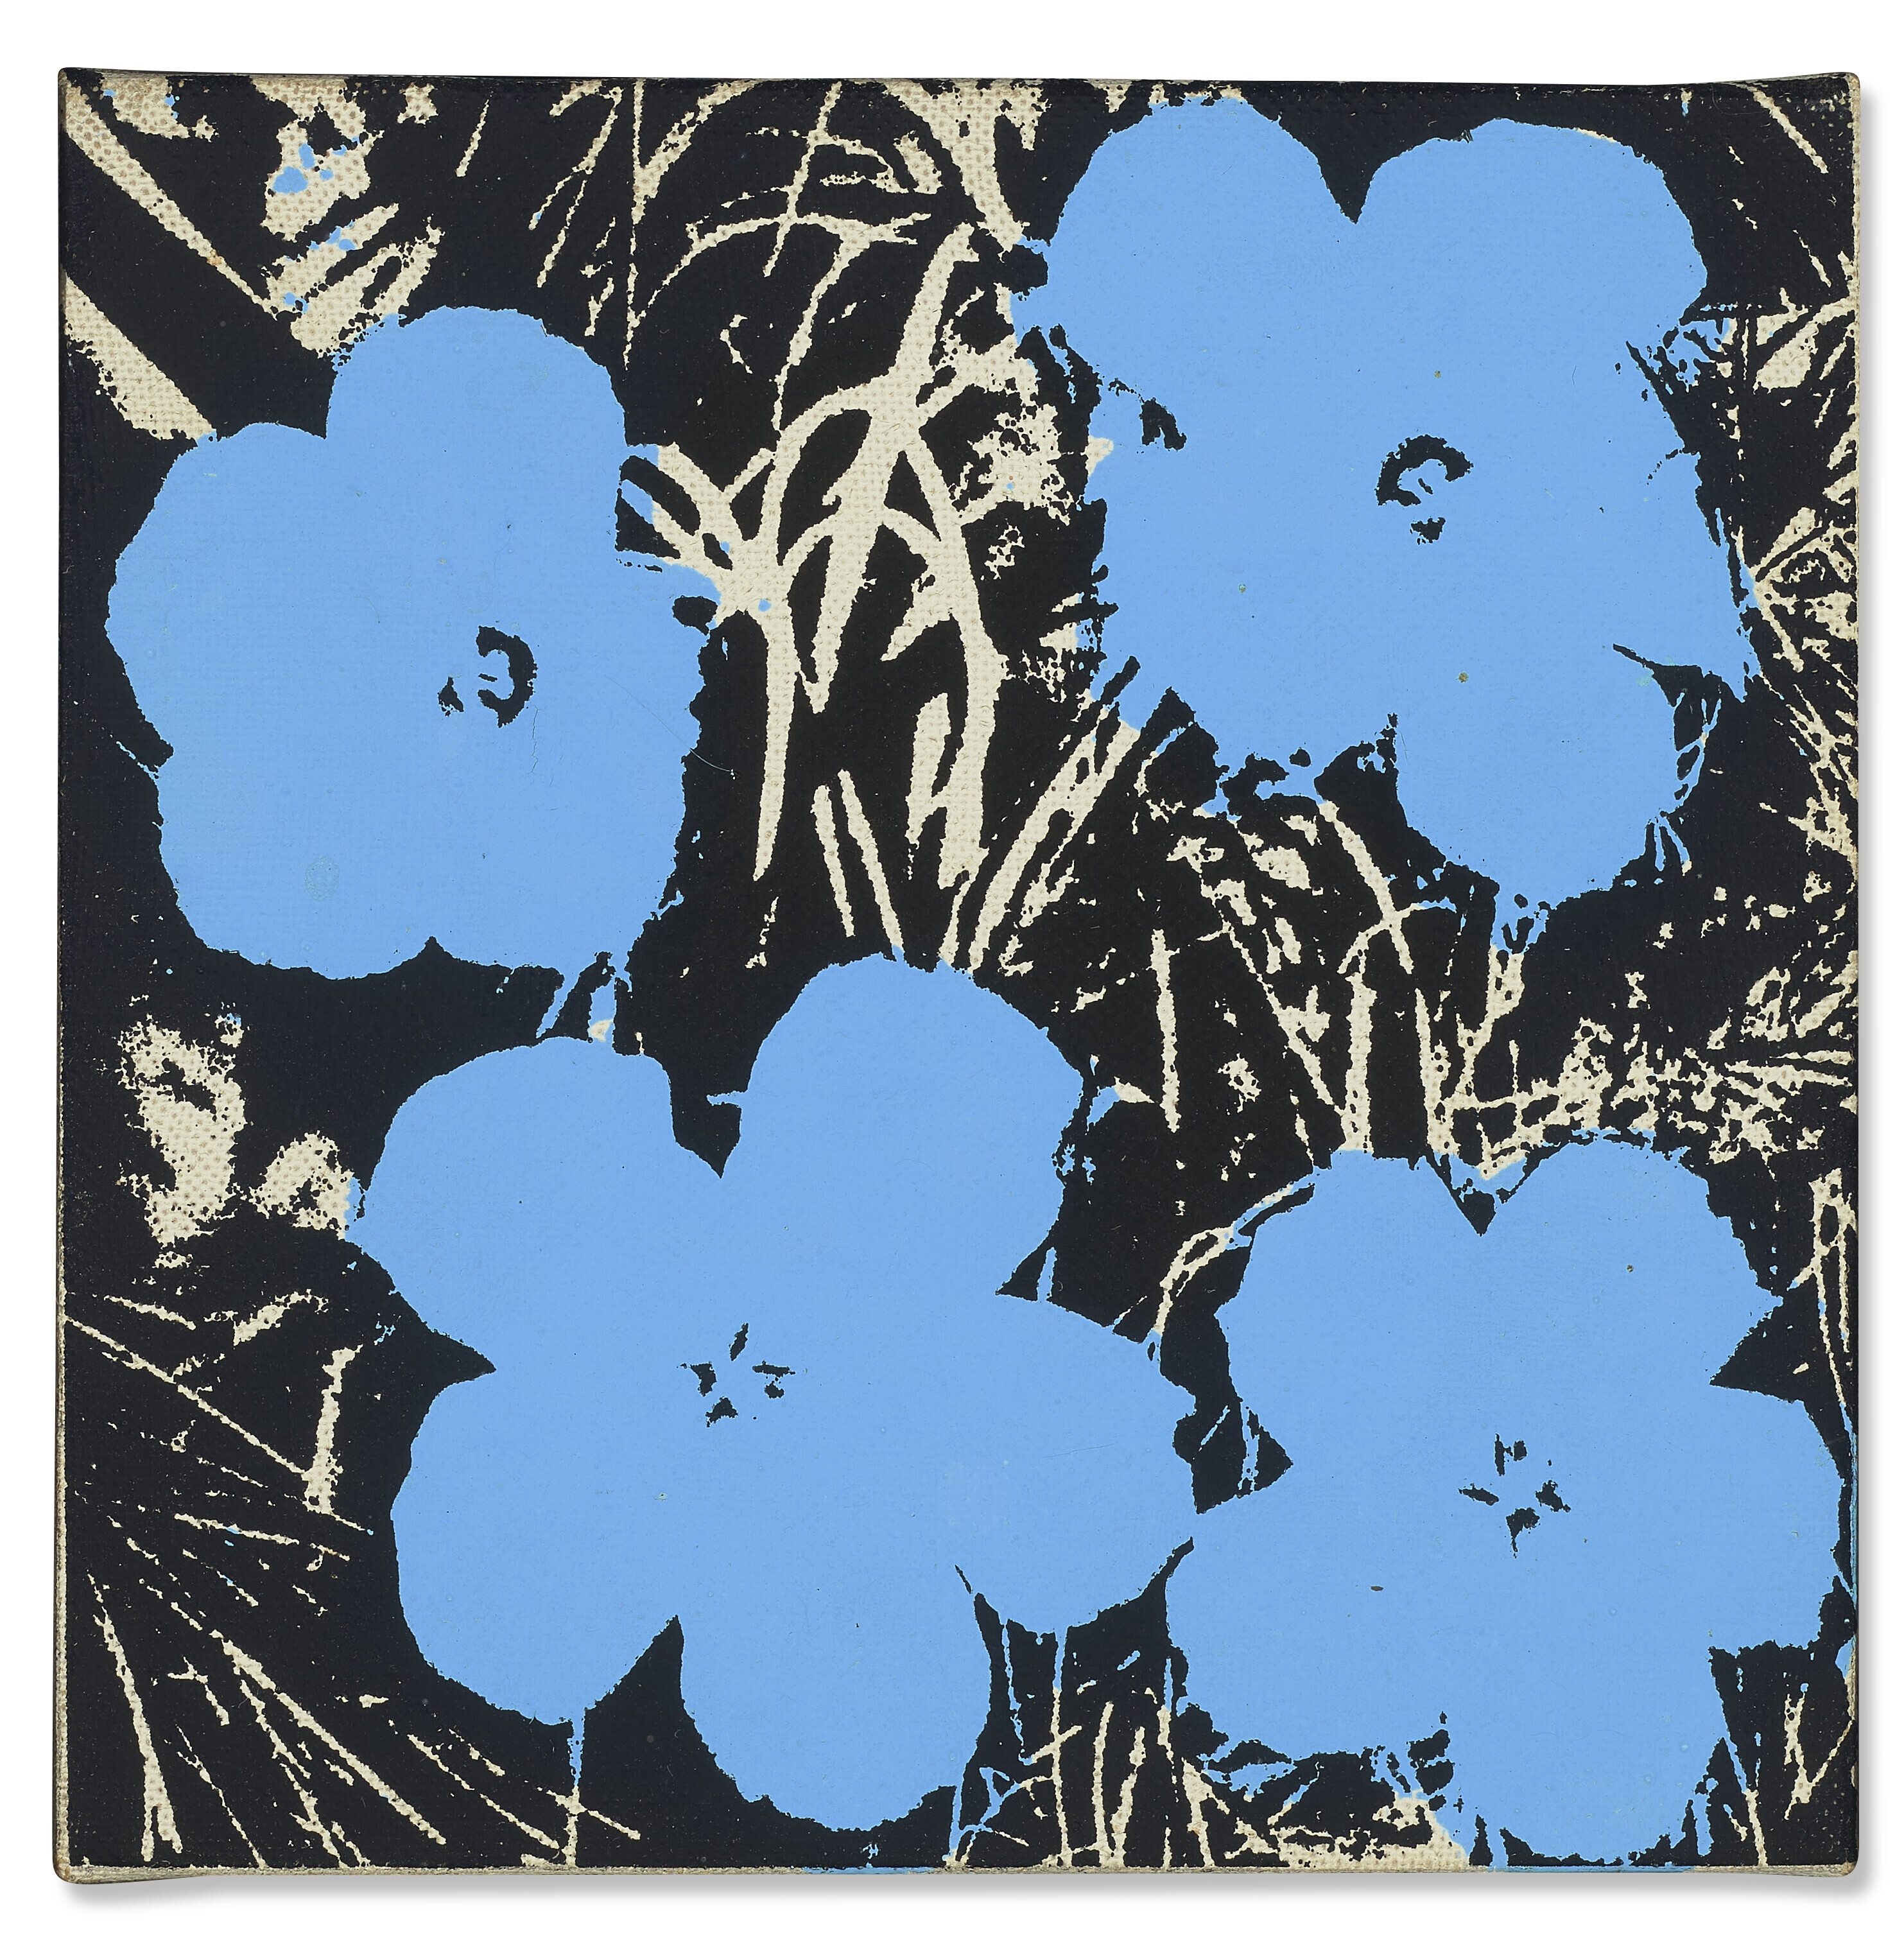 Flowers by Andy Warhol, 1964, Painted in 1964